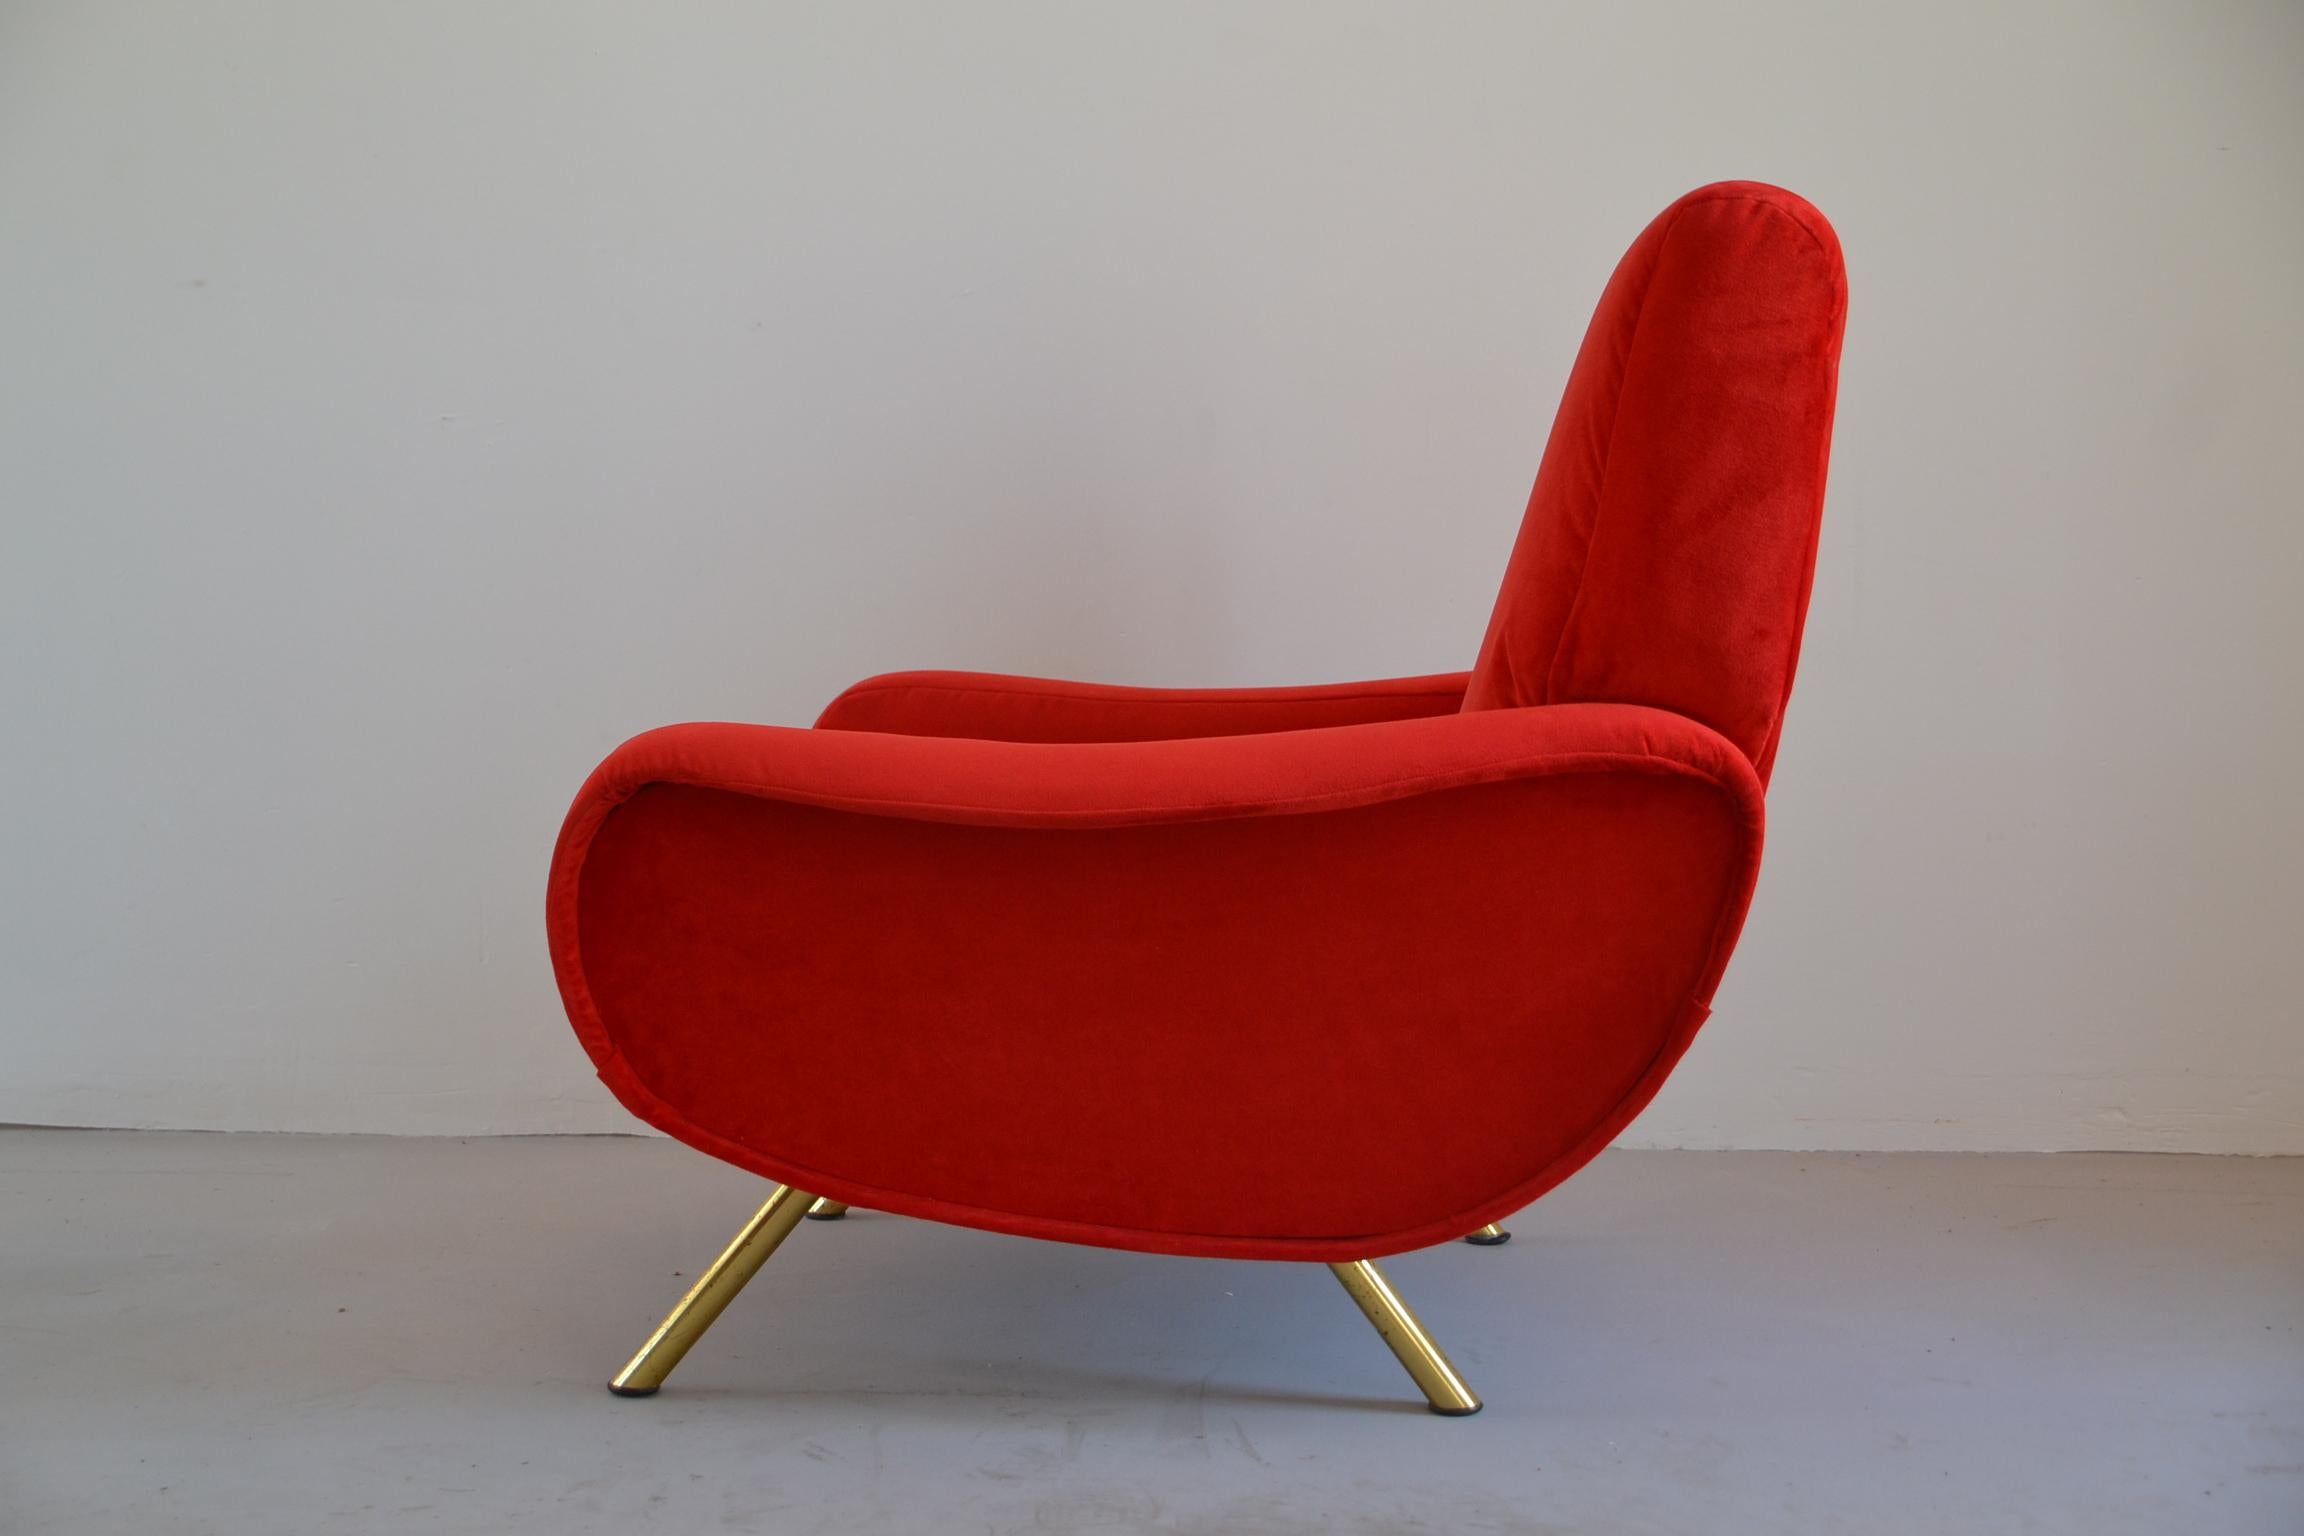 - Armchair, model Lady, designed by Marco Zanuso
- Manufactured by Arflex in 1951
- Red velvet fabric
- New foams.